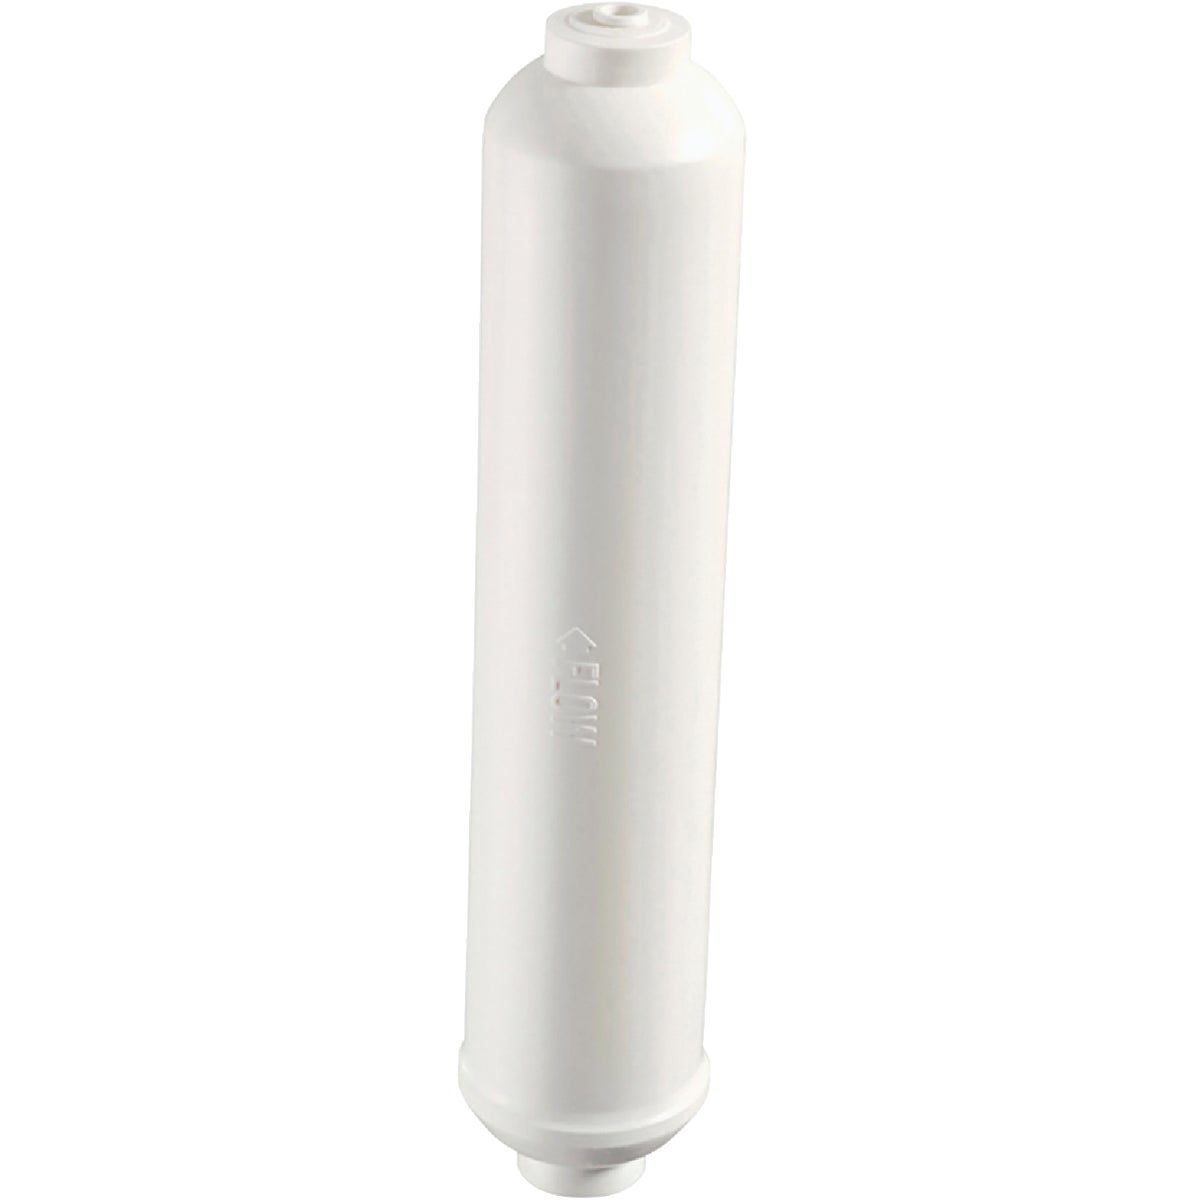 Item 432679, The Culligan filter is a level 1 drinking water filter that connects to the